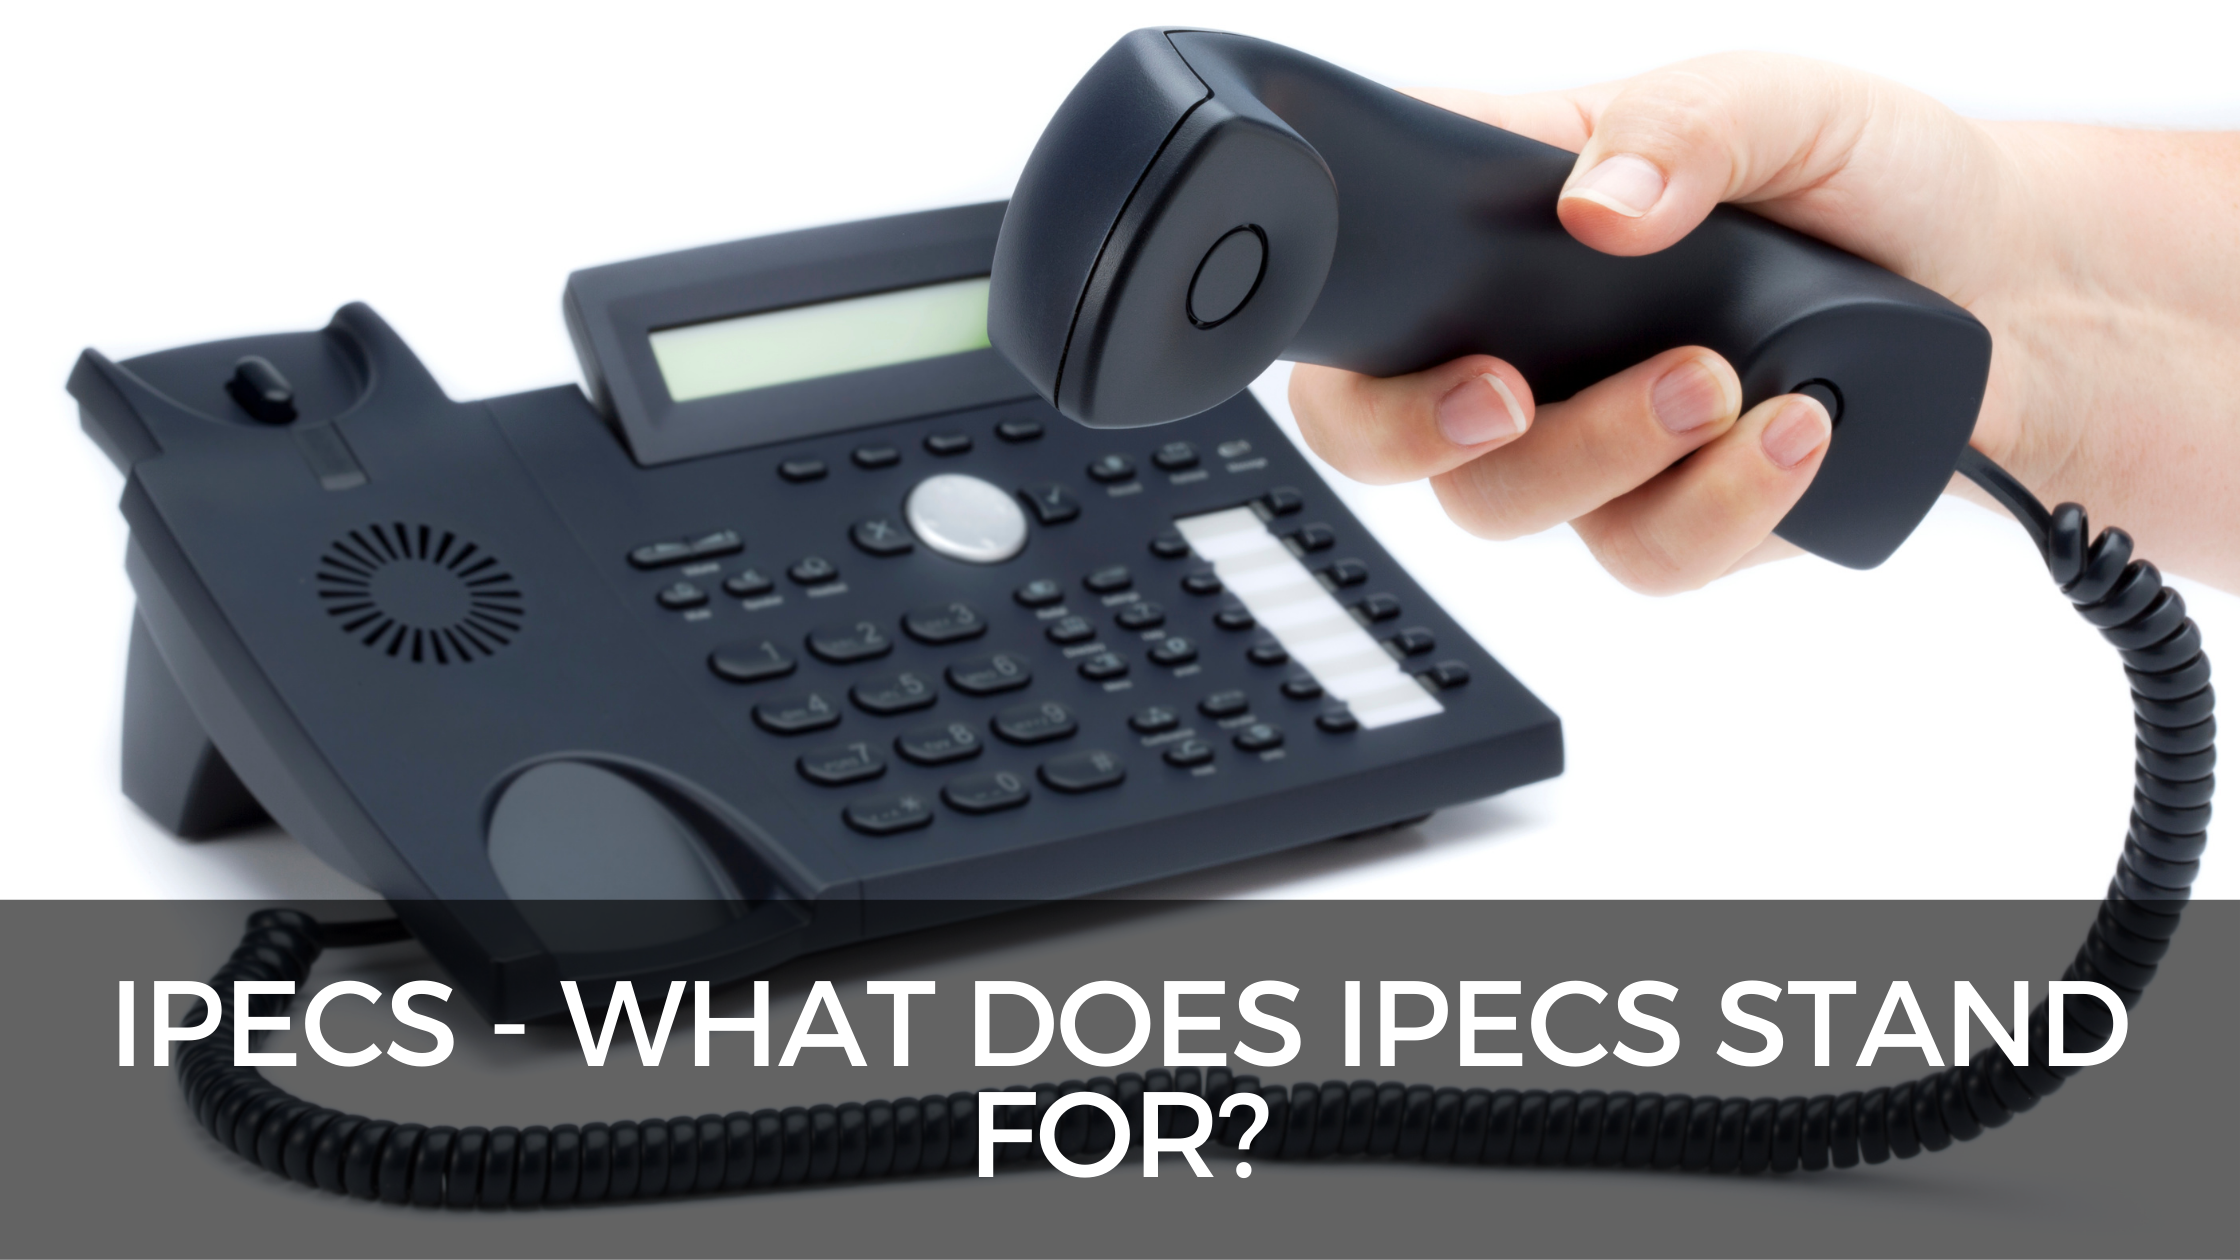 IPECS - What does IPECS stand for?